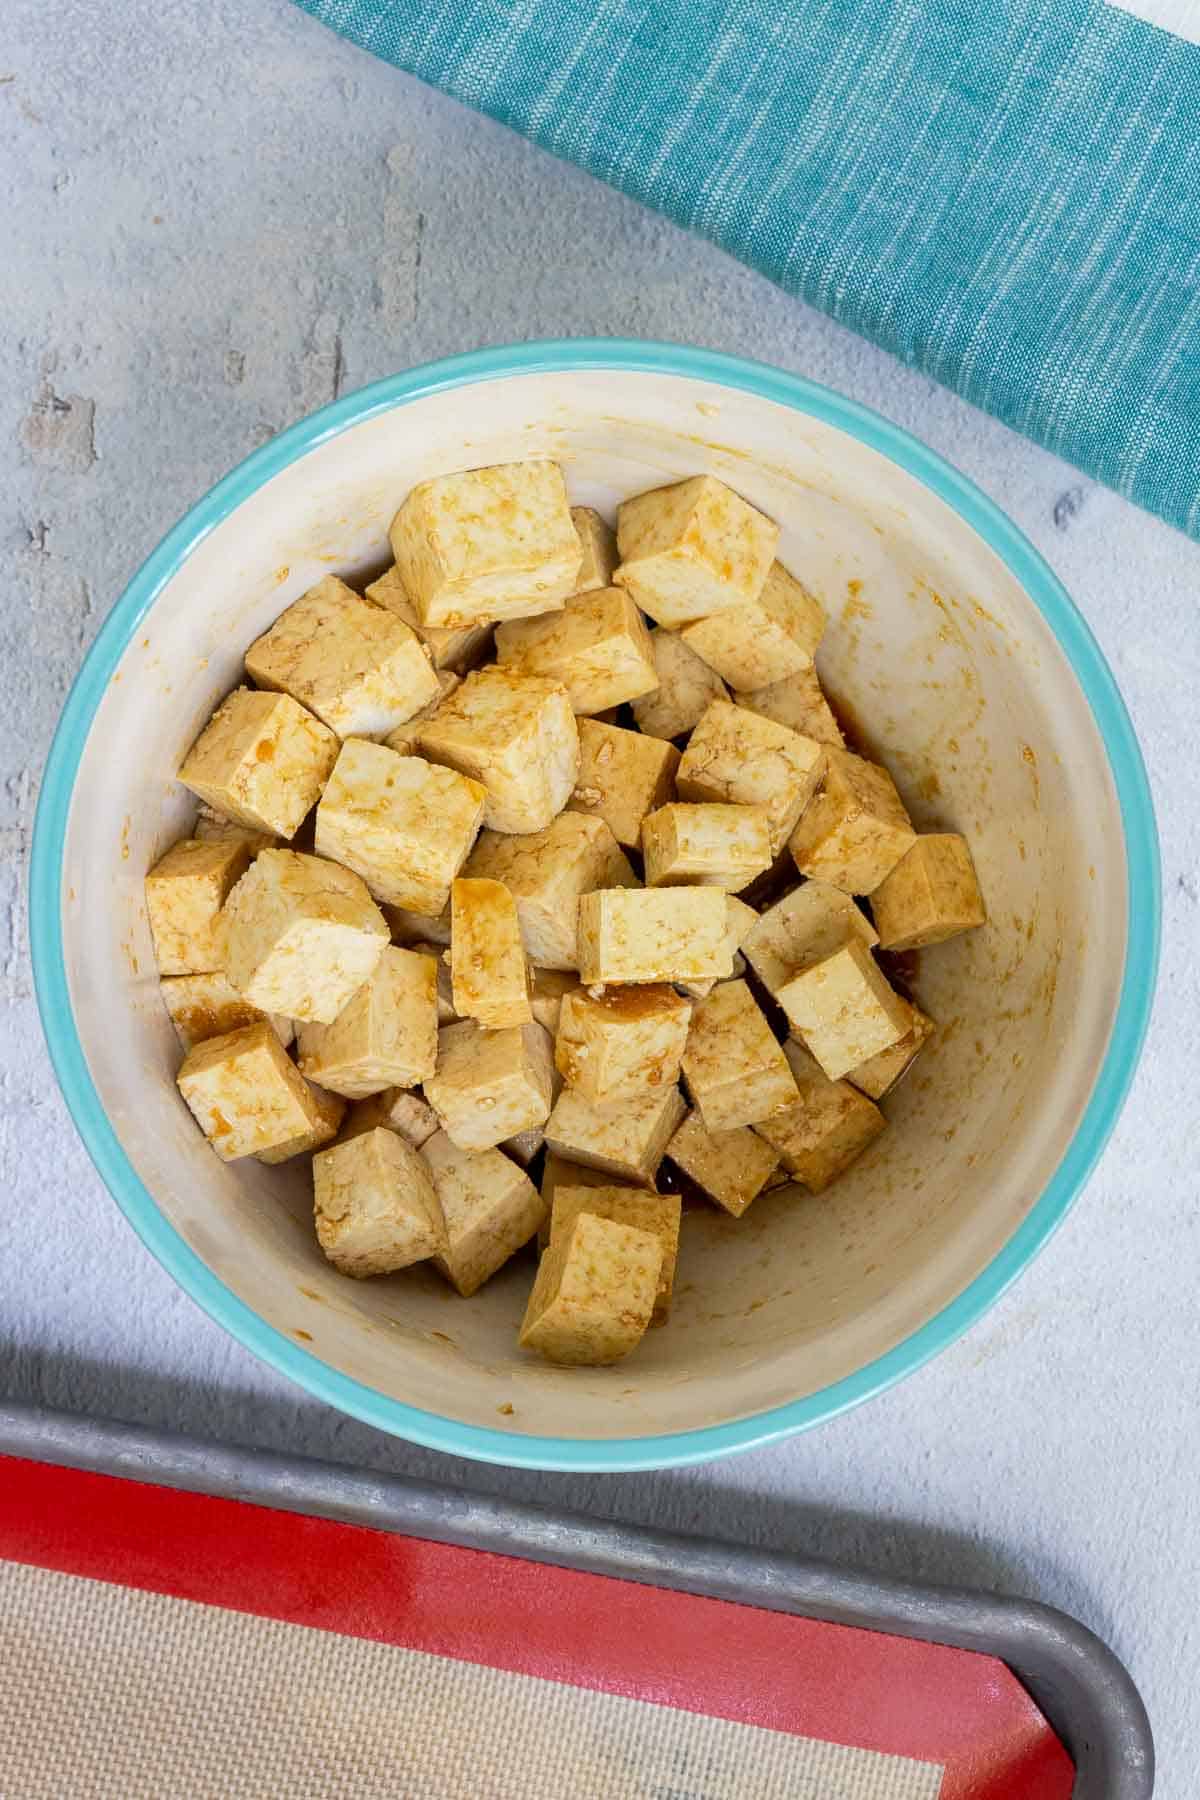 Cubed tofu is tossed in the soy sauce marinade and well-coated.